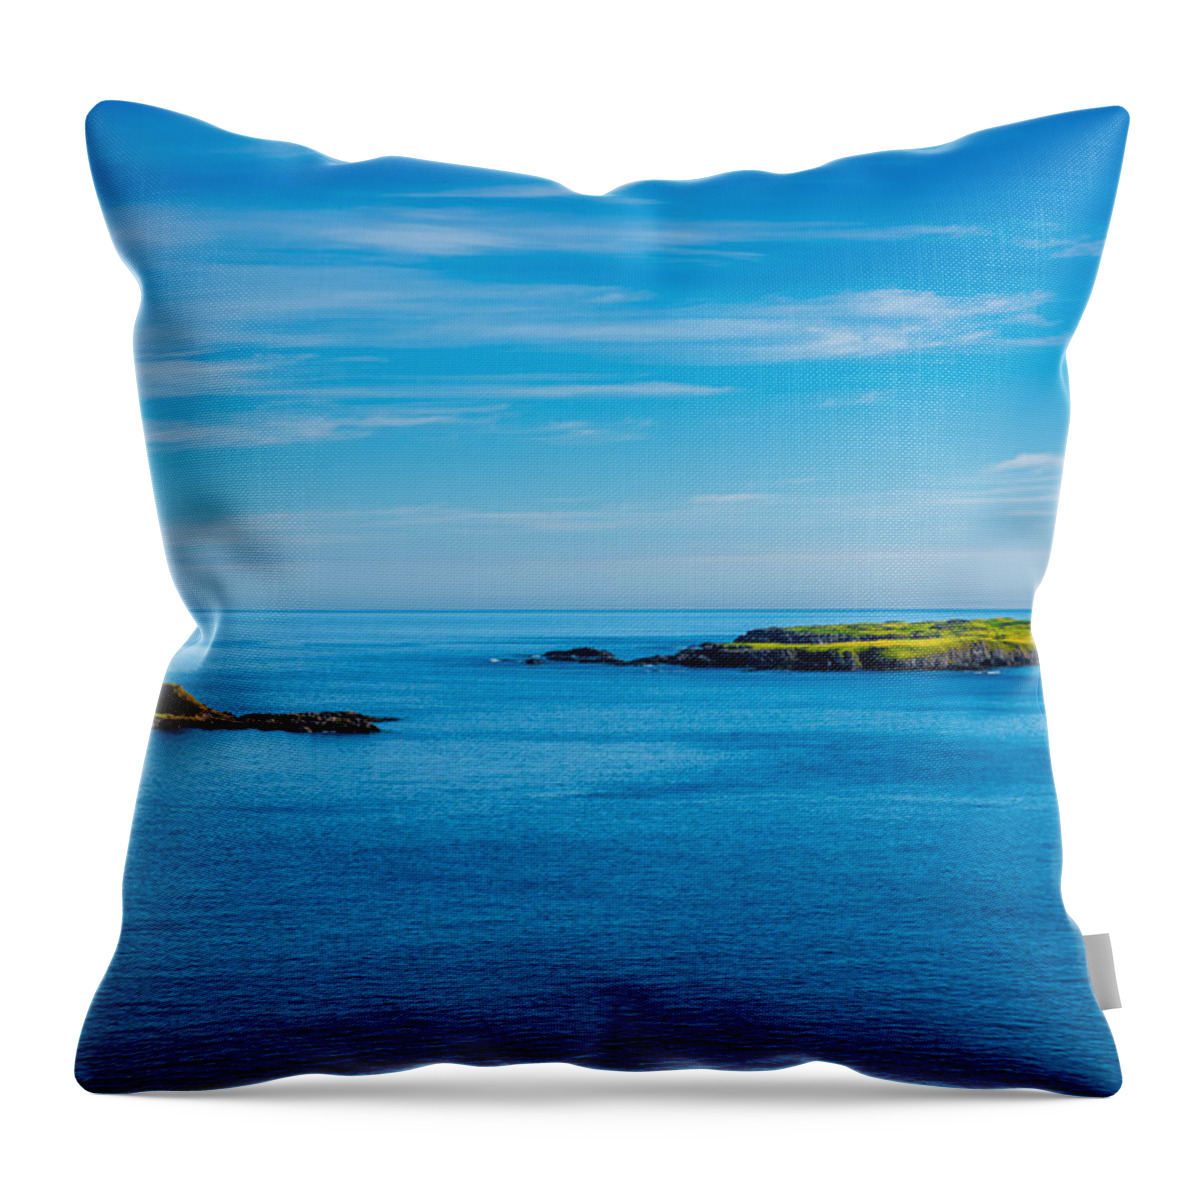 Scotland Throw Pillow featuring the photograph Remote Island by Andreas Berthold